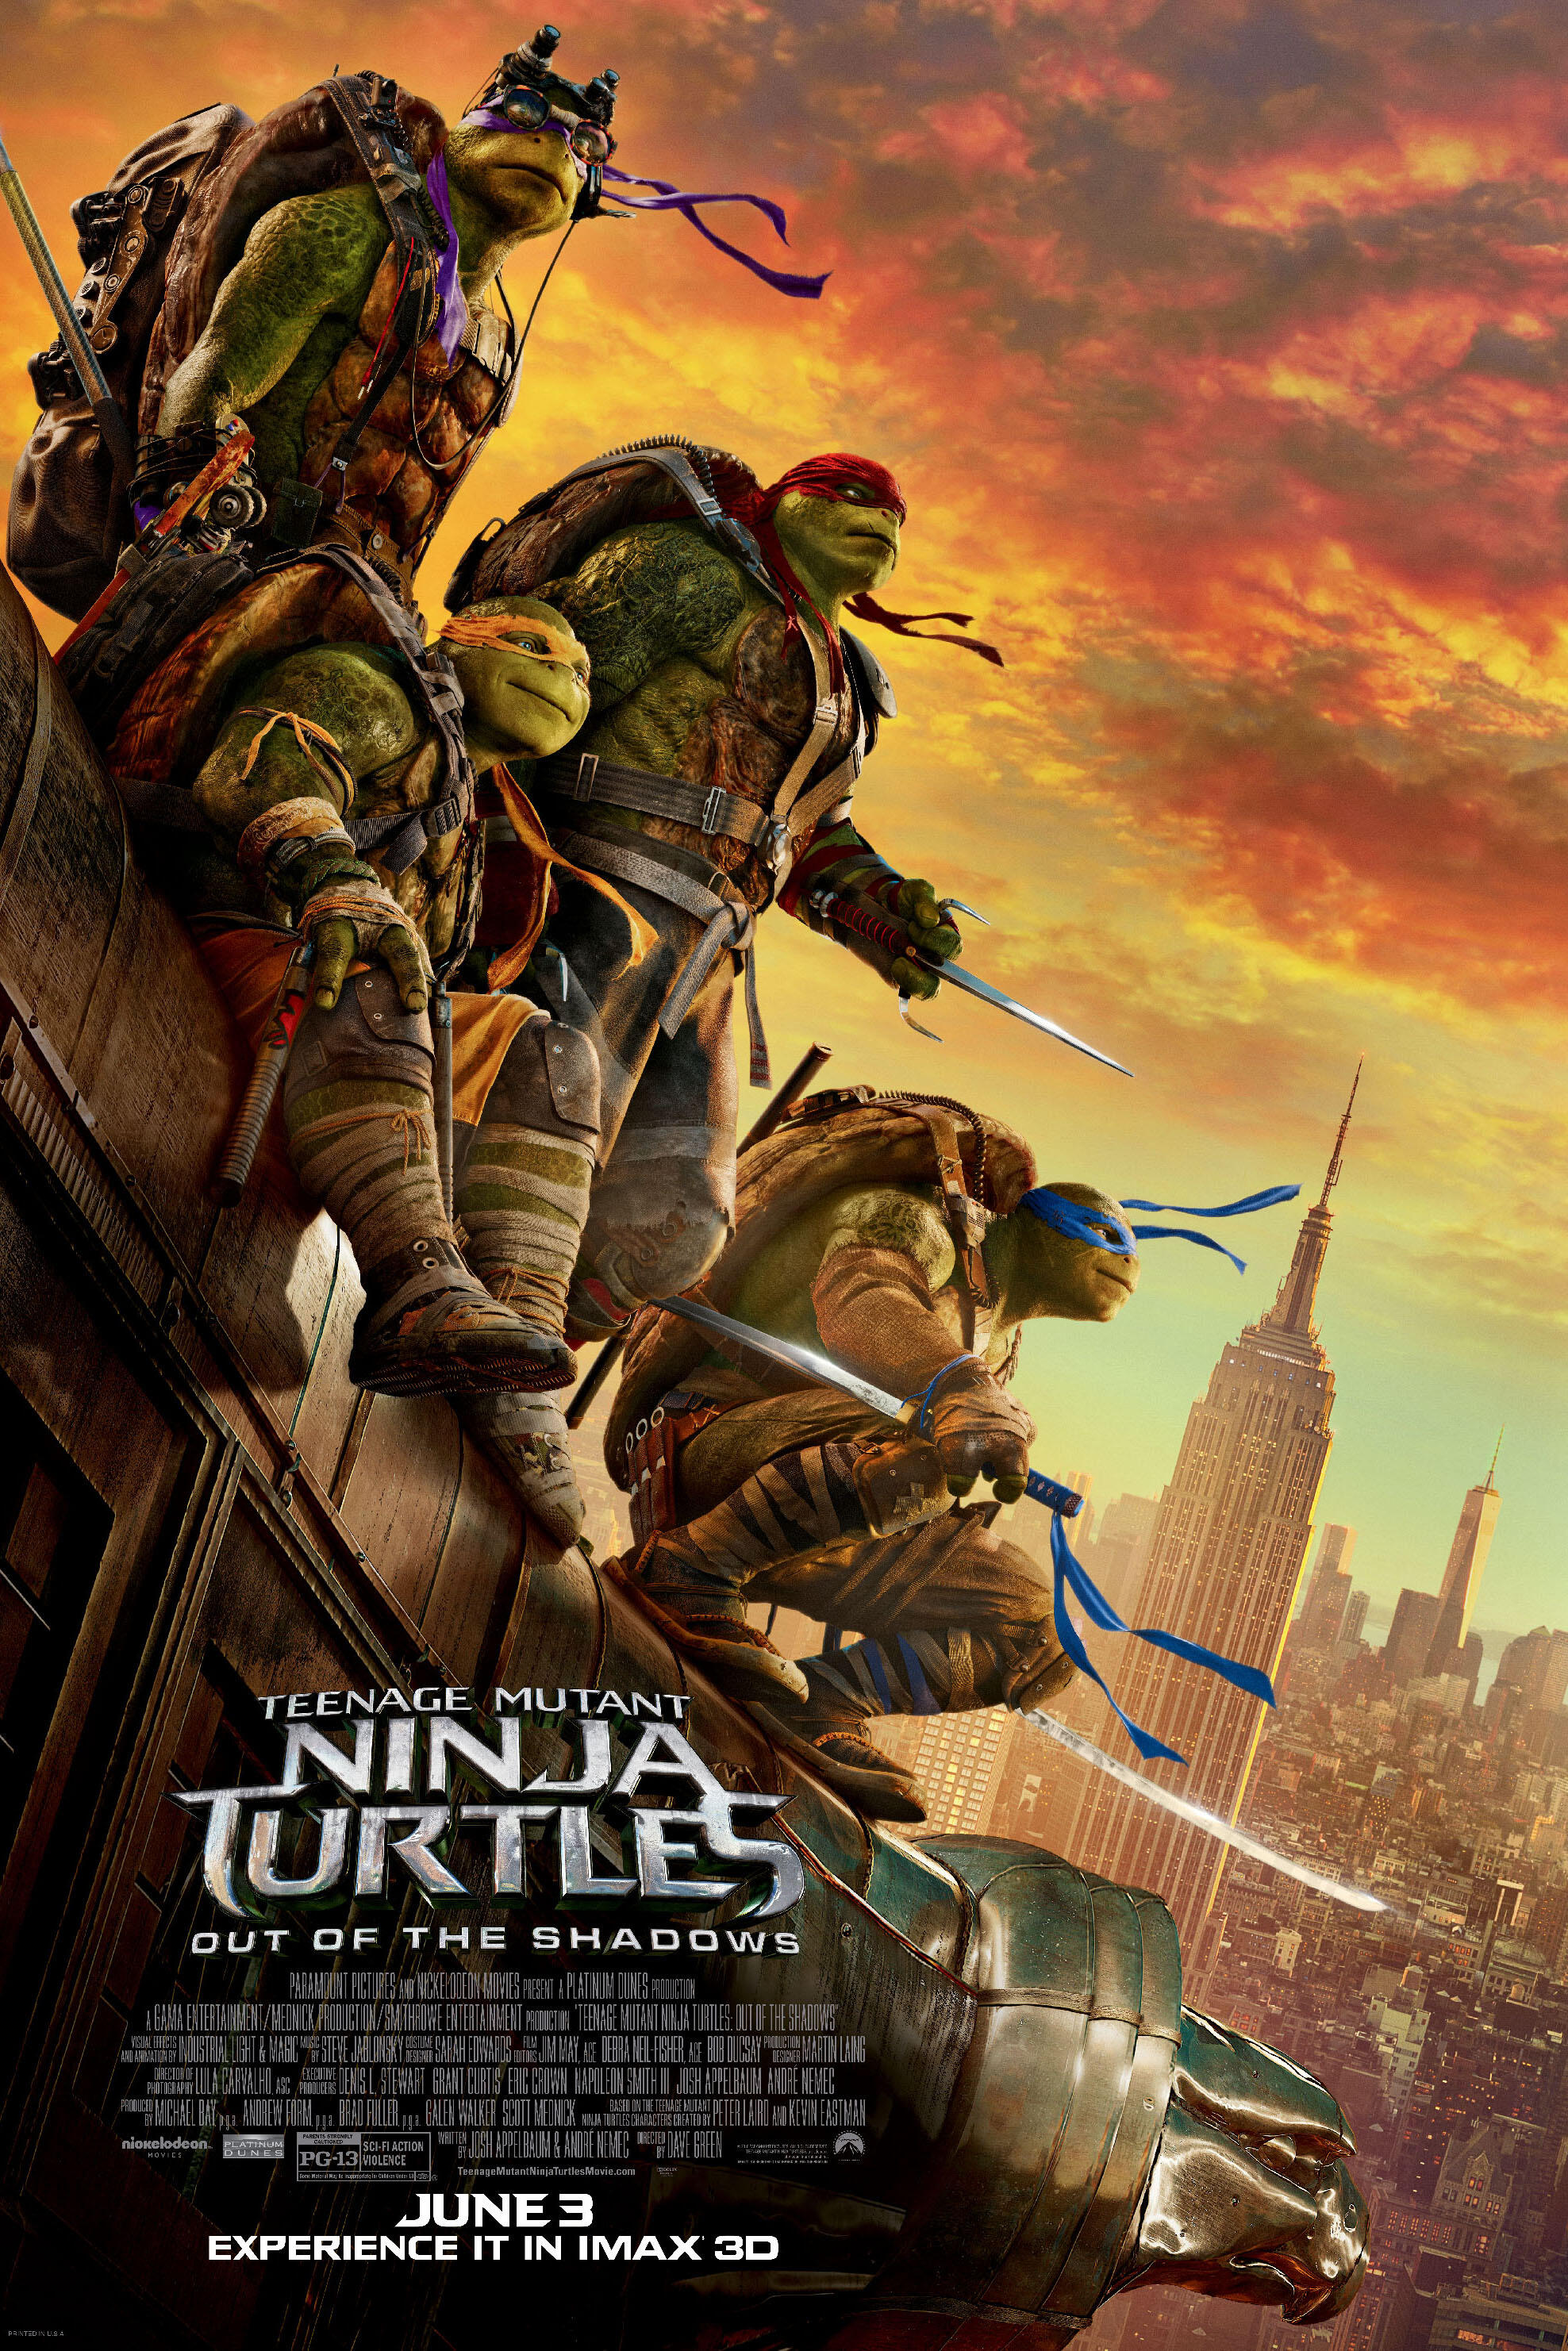 Teenage Mutant Ninja Turtles Out of the Shadows IMAX Movie Photos and